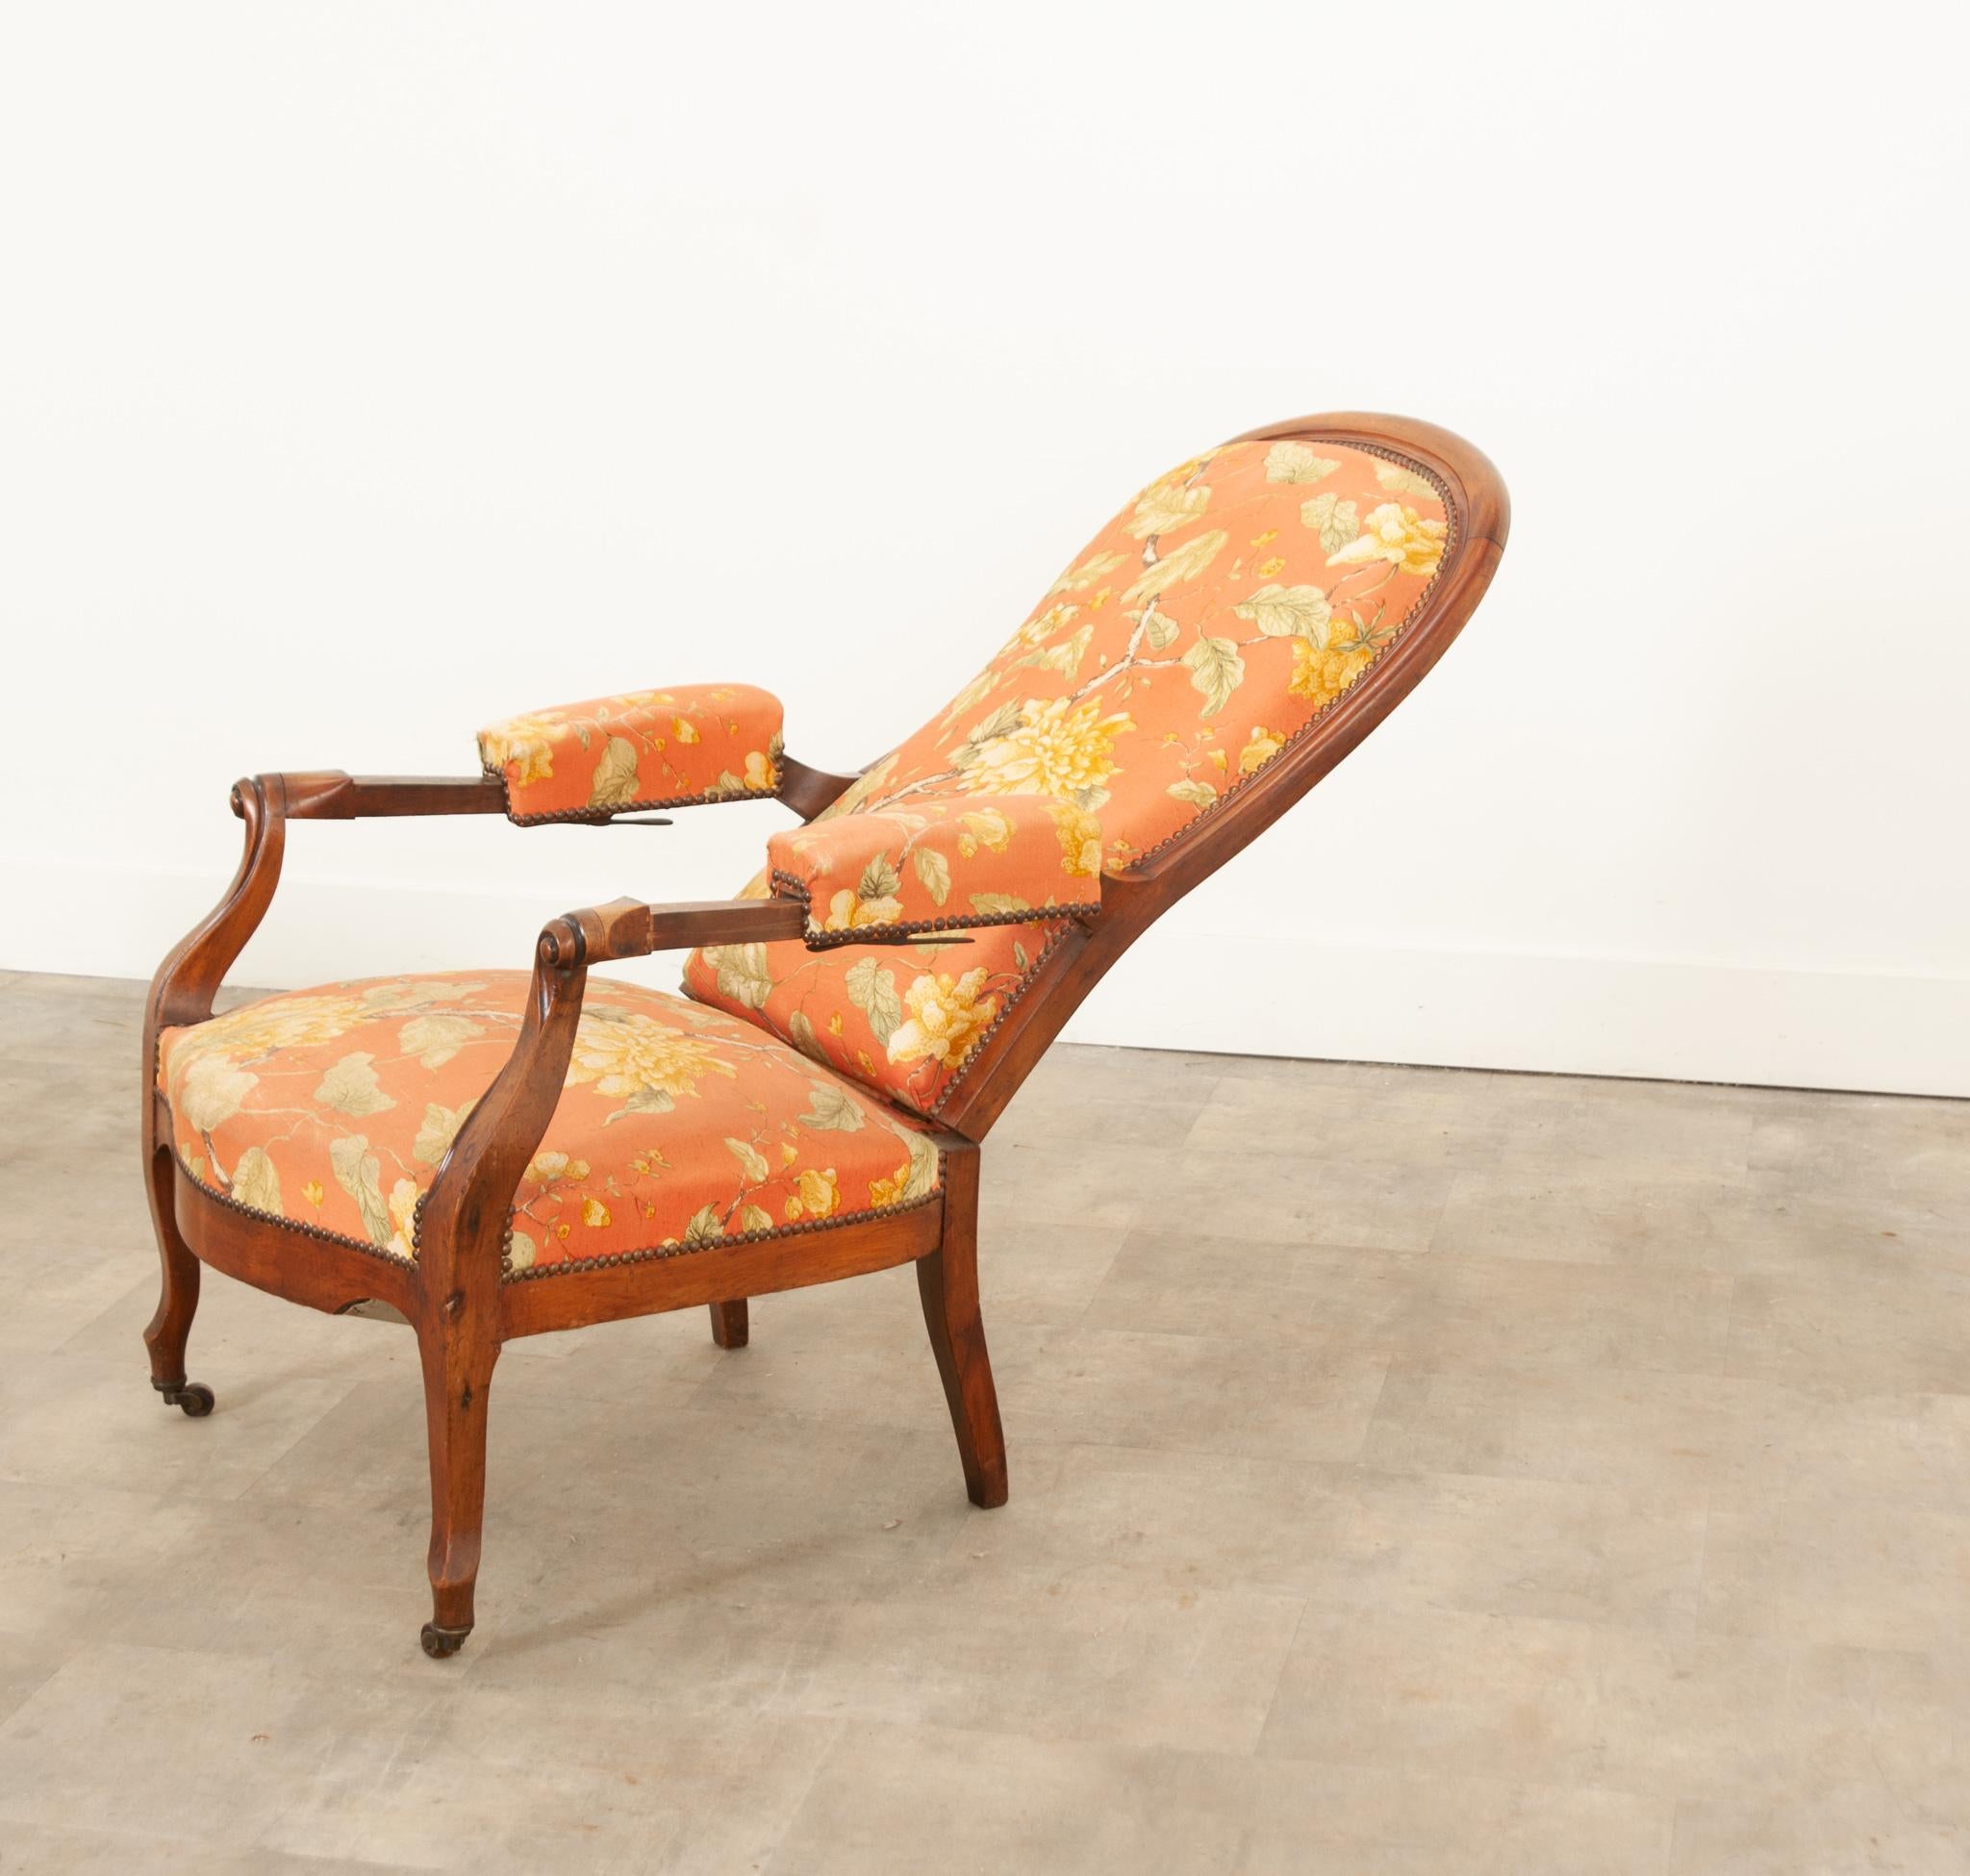 English 19th Century Upholstered Mahogany Recliner For Sale 5